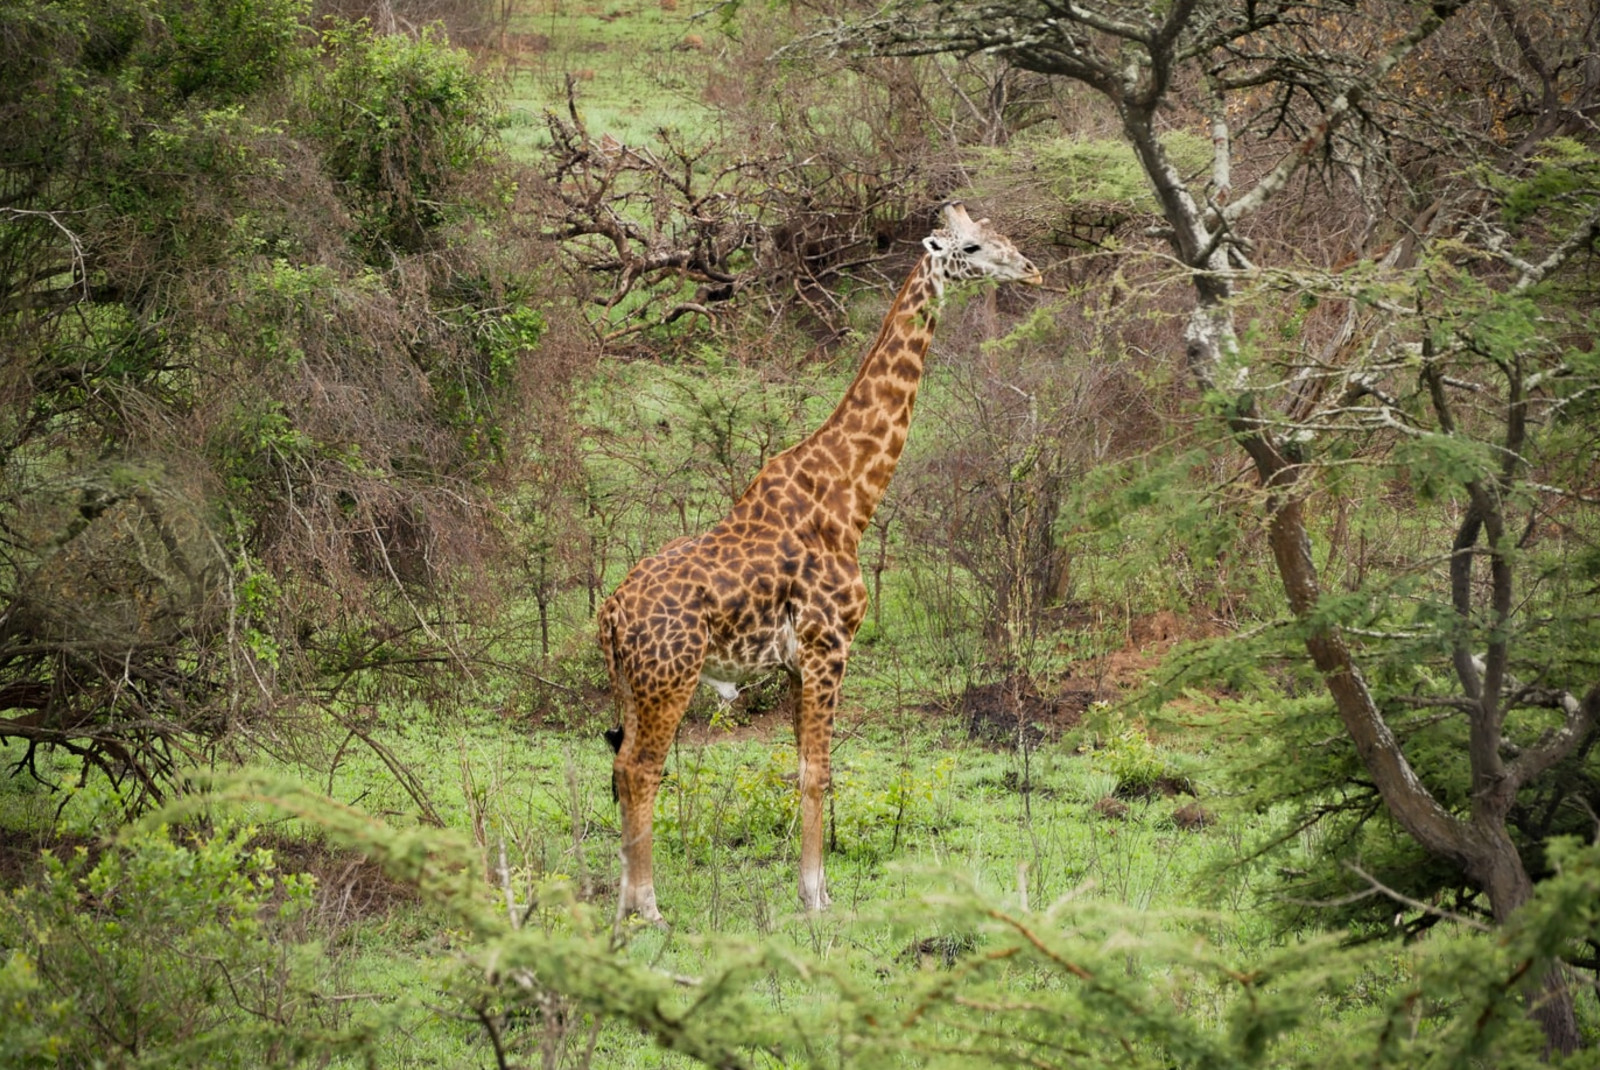 Akagera National Park yellow and brown giraffe on green grass surrounded by trees